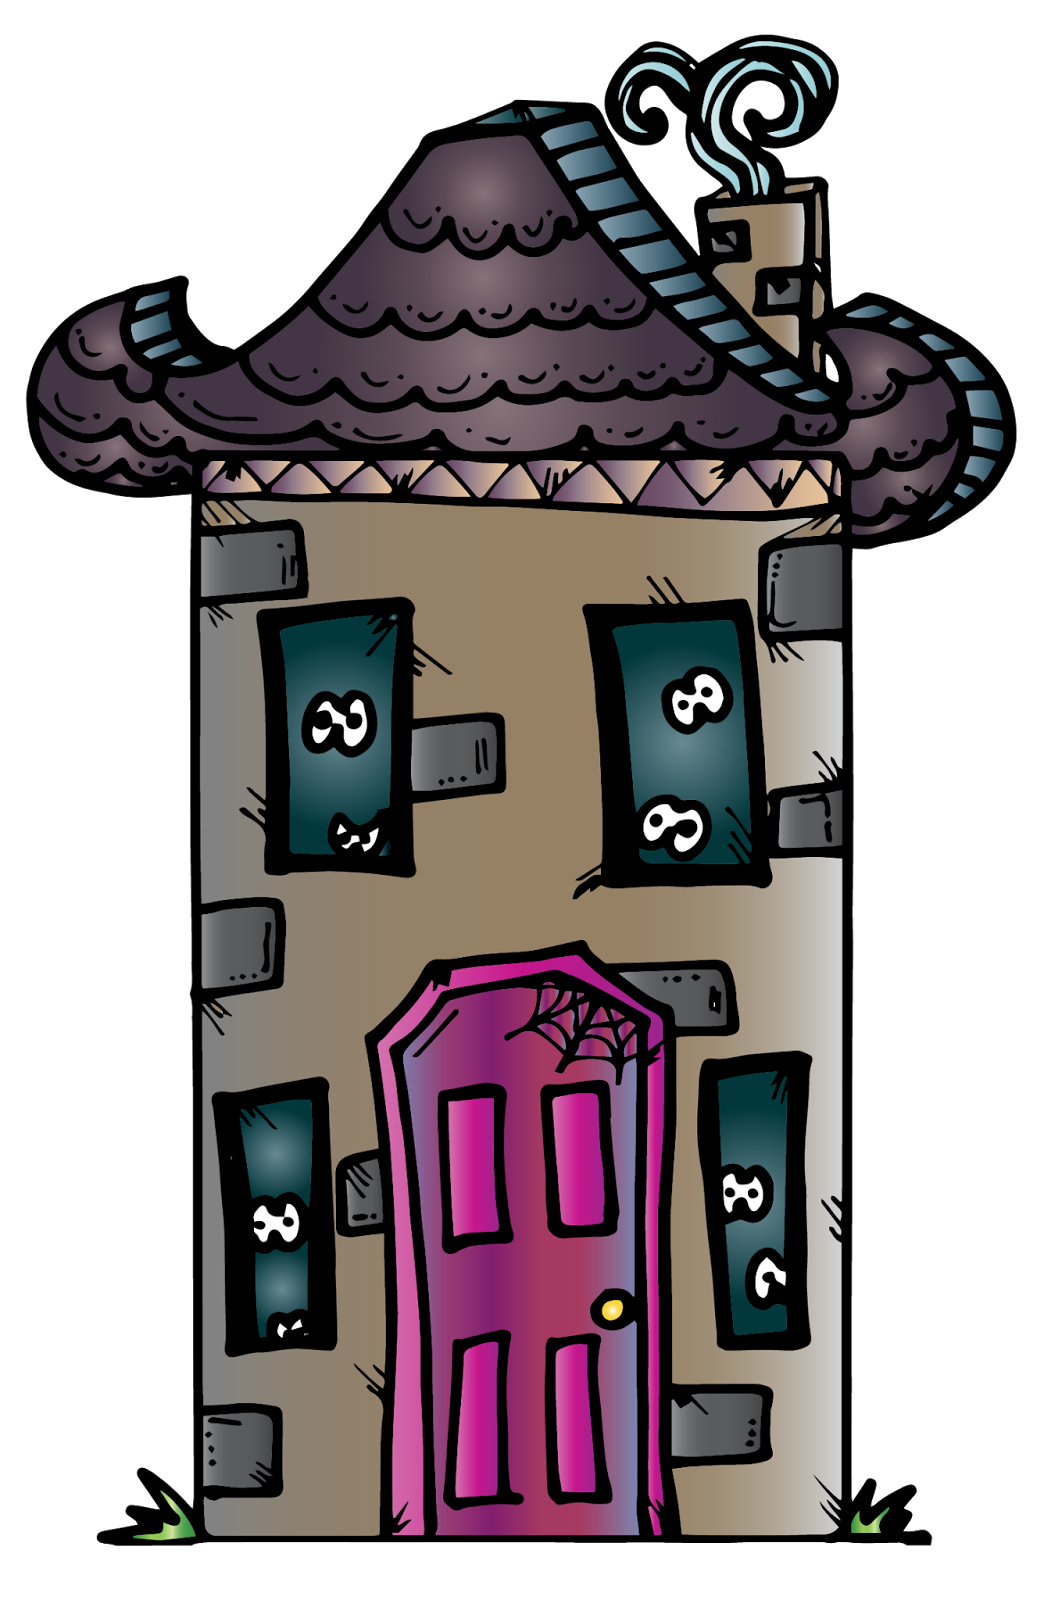 Tower clipart haunted. Ta doodles illustrations friday